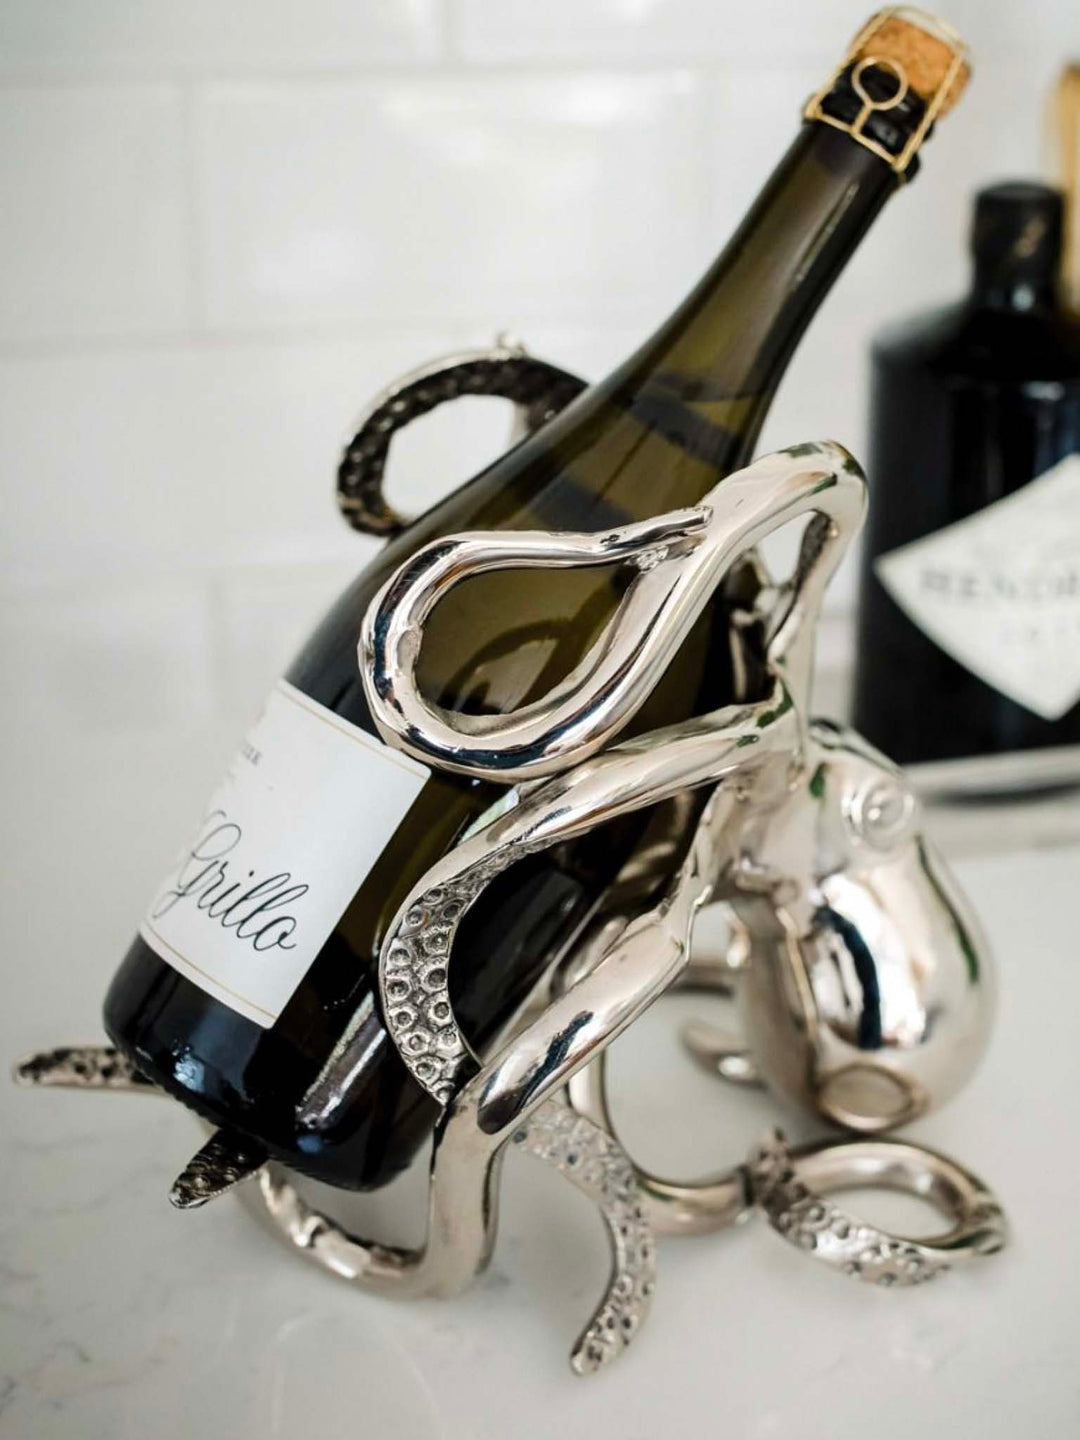 Octopus Wine Bottle Holder, culinary concepts